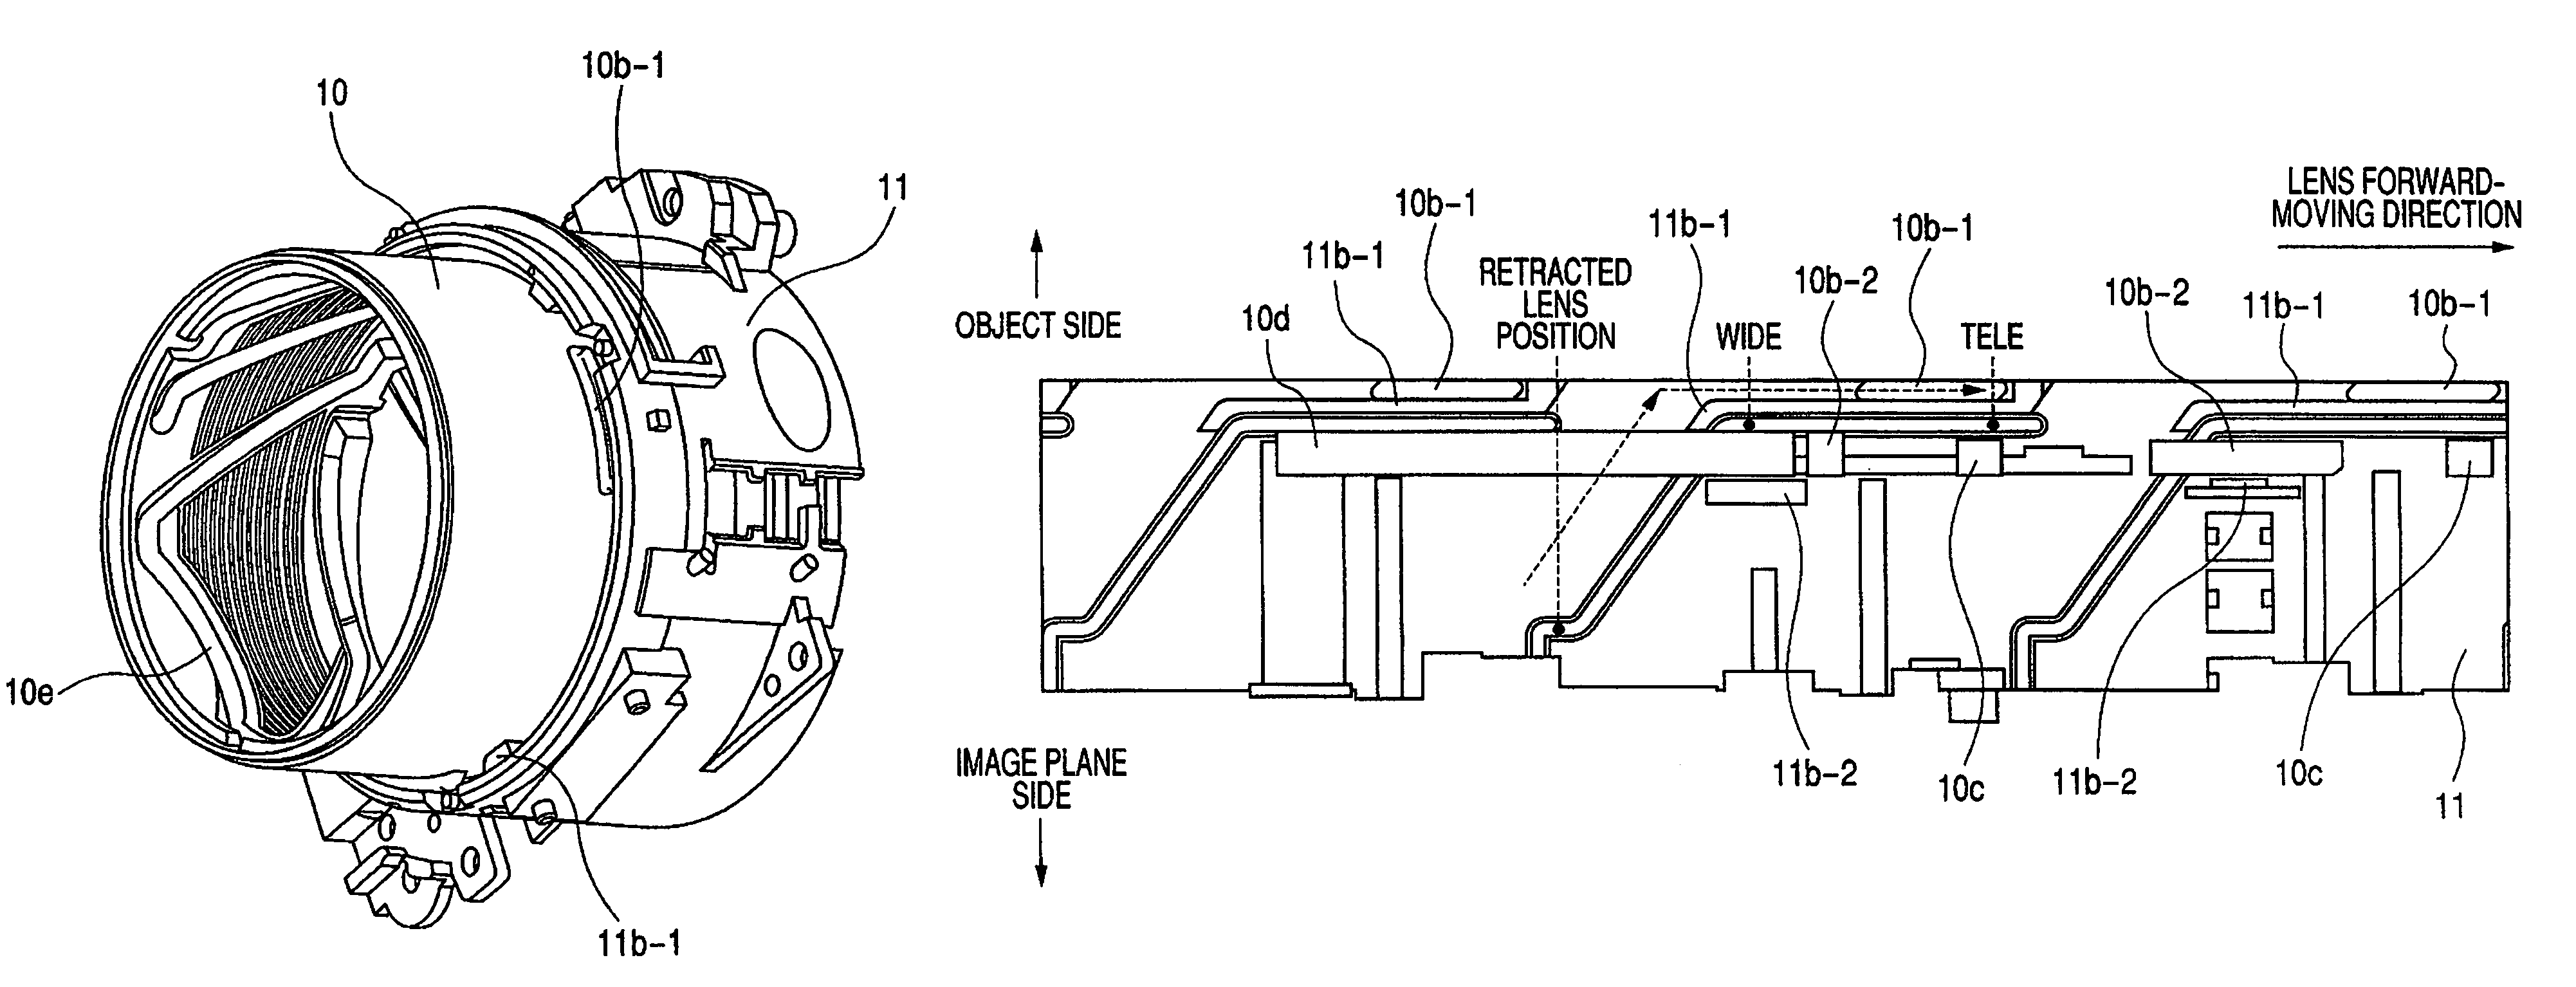 Optical apparatus such as digital still camera, video camera, and interchangeable lens